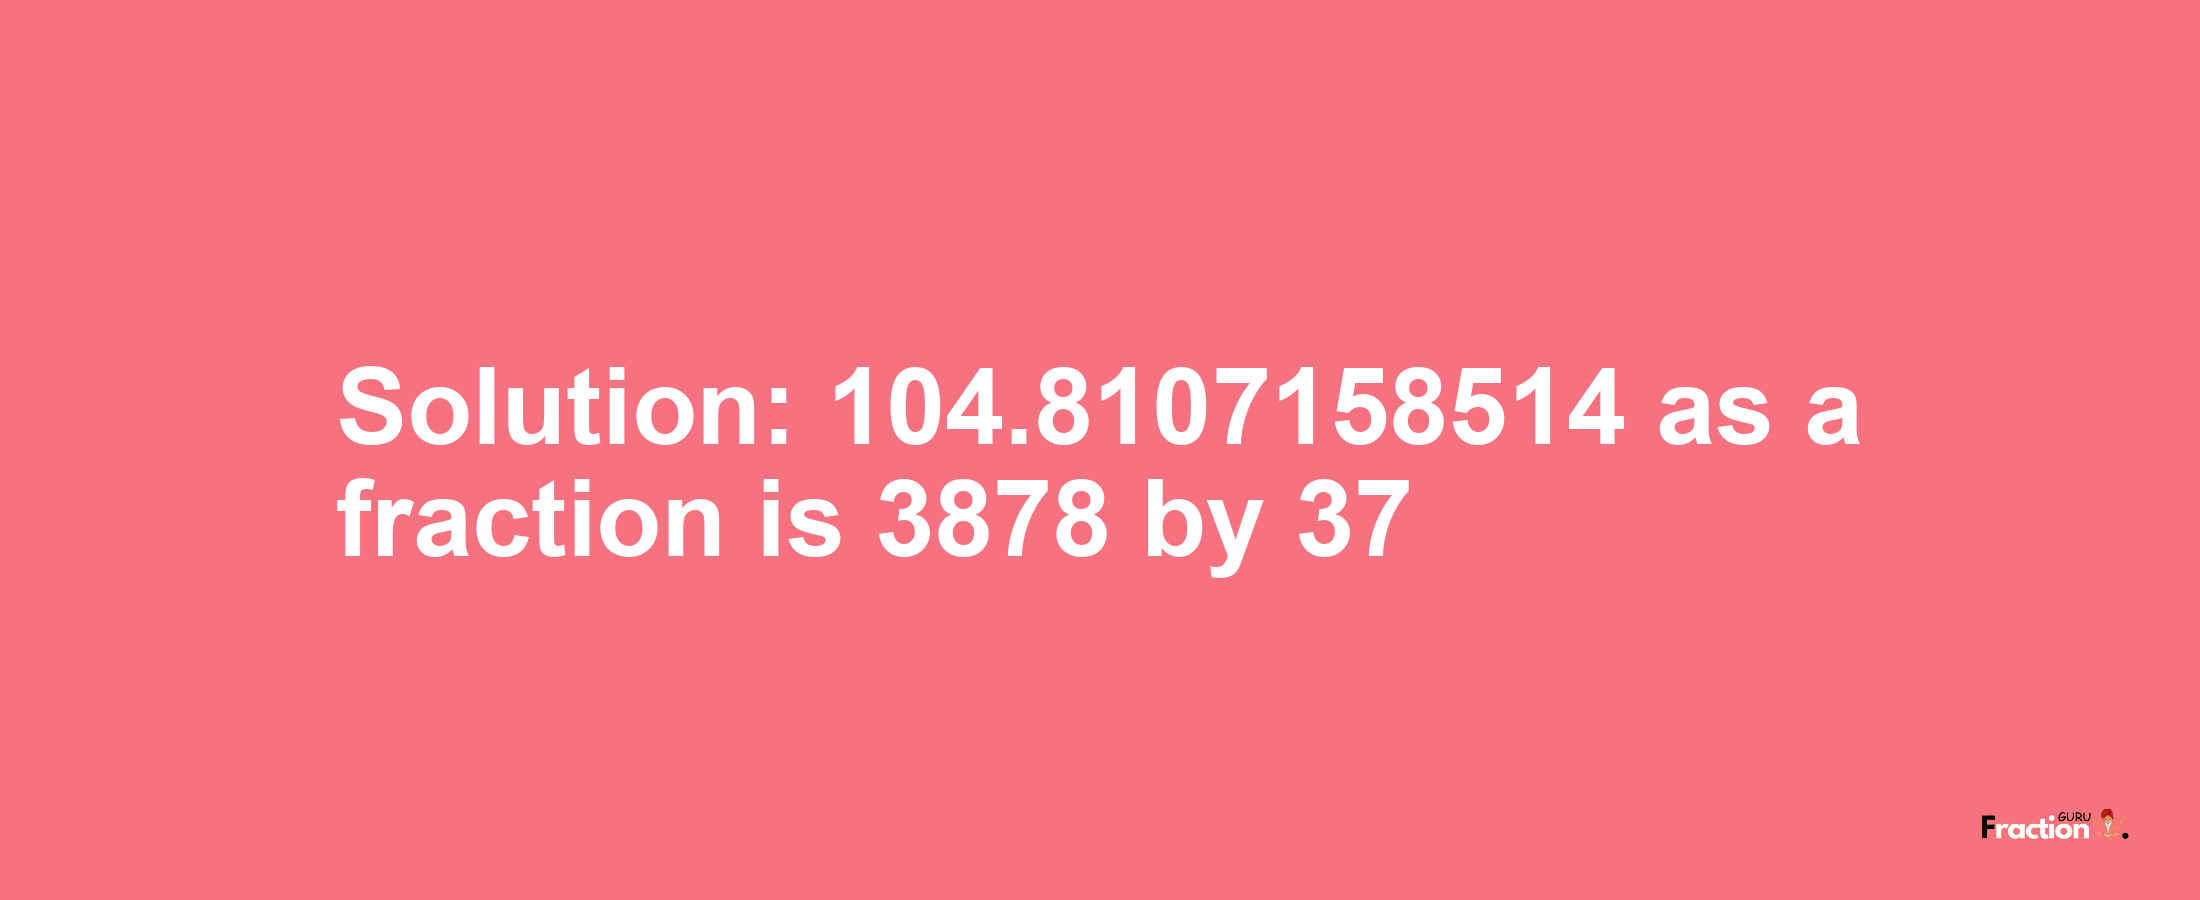 Solution:104.8107158514 as a fraction is 3878/37